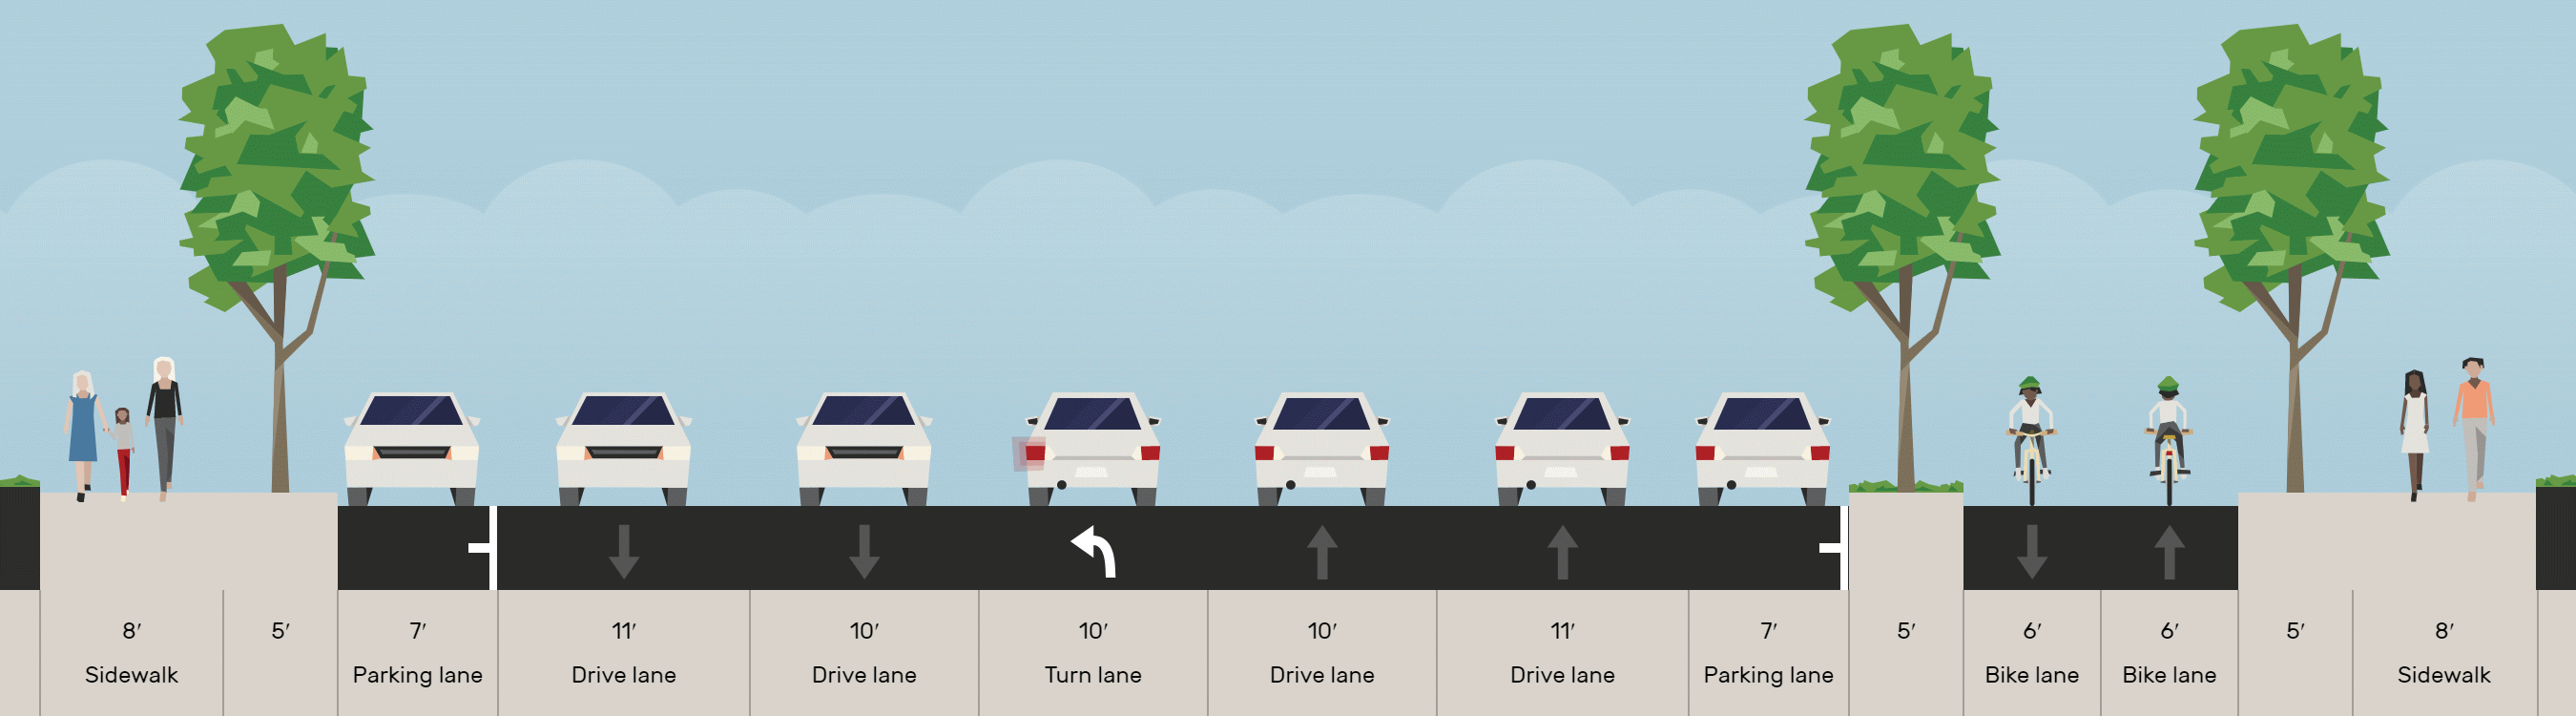 A cross section for Fairfax Drive features, in order from south to north: a 7&#x27; parking lane, an 11&#x27; eastbound driving lane, a 10&#x27; eastbound riving lane, a 10&#x27; turn lane or 10&#x27; median, a 10&#x27; westbound driving lane, an 11&#x27; westbound driving lane, a 7&#x27; parking lane, a 5&#x27; raised planting area, a 6&#x27; eastbound bike lane, a 6&#x27; westbound bike lane.